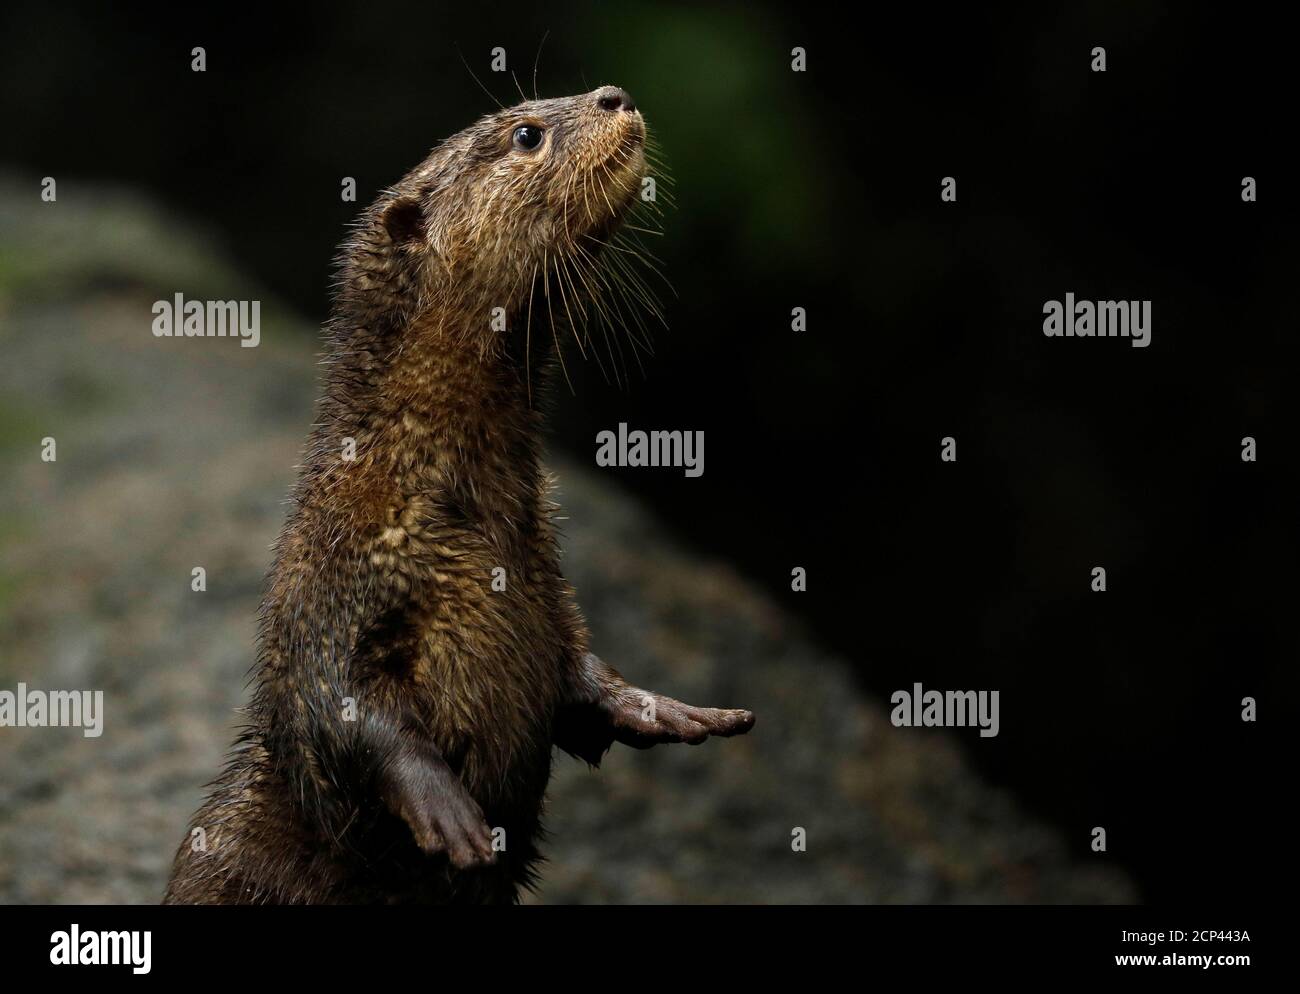 An Asian small-clawed otter, one of the 14 birthed at the Singapore Zoo and Night Safari, is pictured during a media tour to showcase newborn animals at the Singapore Zoo January 11, 2018. REUTERS/Edgar Su Stock Photo